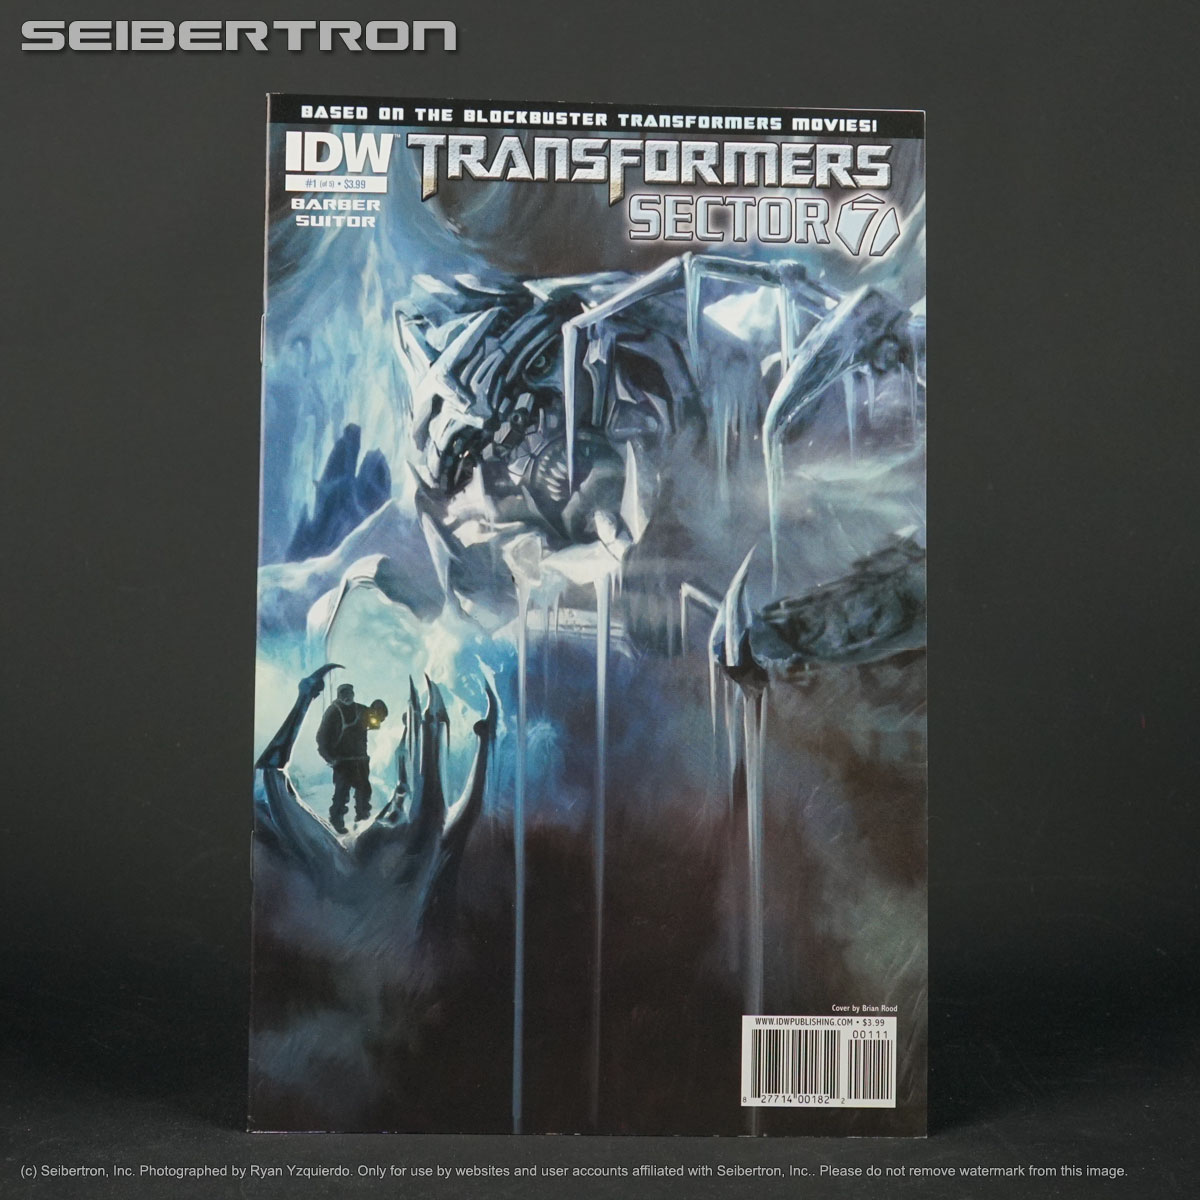 Transformers SECTOR 7 #1 (of 5) Cover A IDW Comics 2010 (CA) Rood 200212a